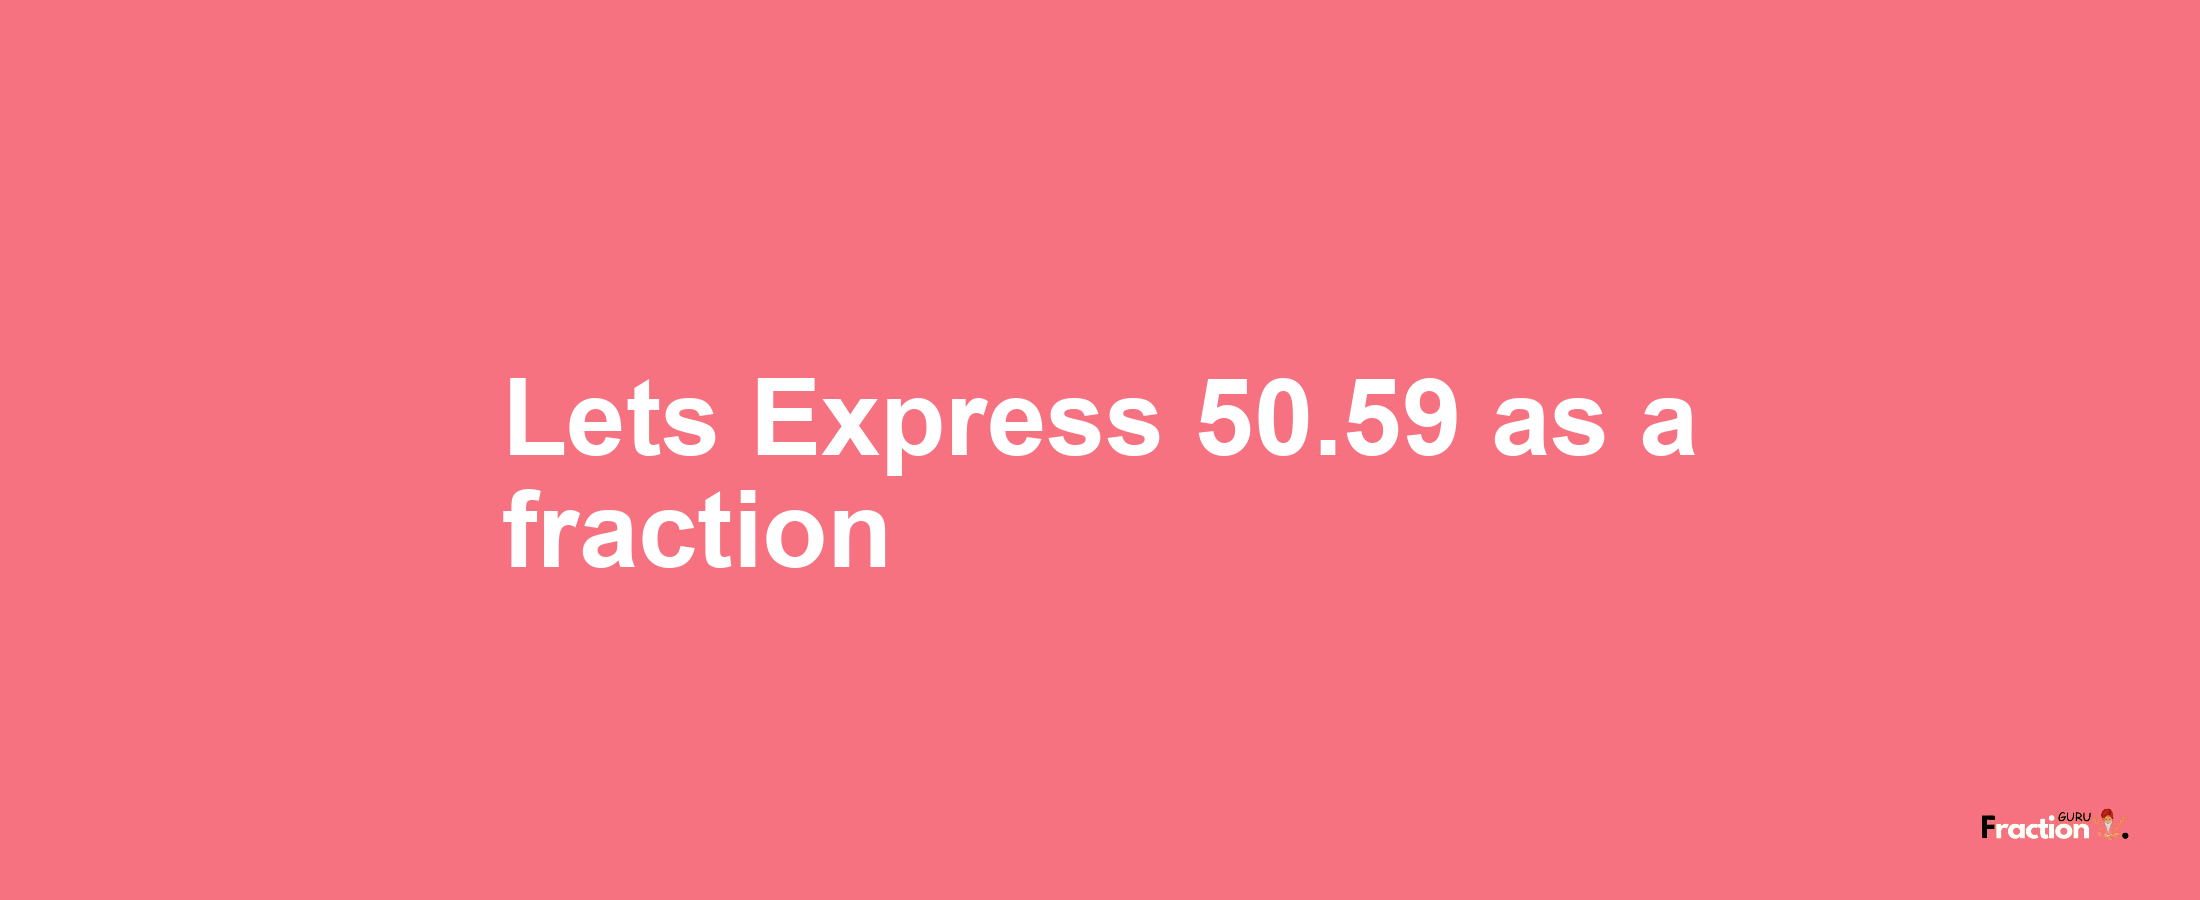 Lets Express 50.59 as afraction